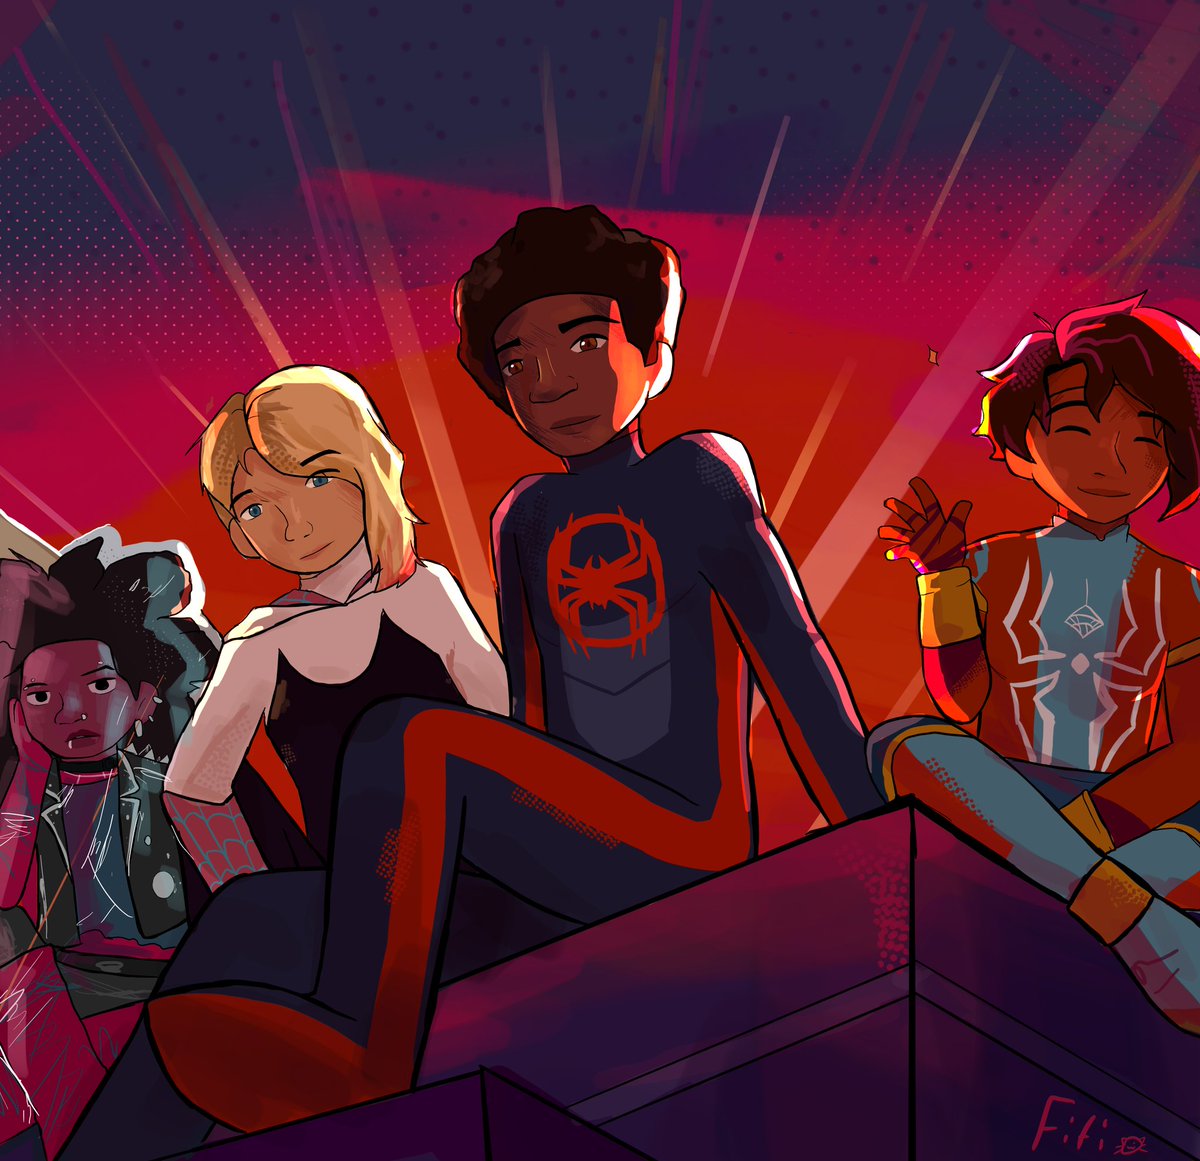 I know I'm a little late to this party but I just watched across the spider verse and I love it so much #SpiderManAcrossTheSpiderVerse #SpiderMan #SpiderVerse